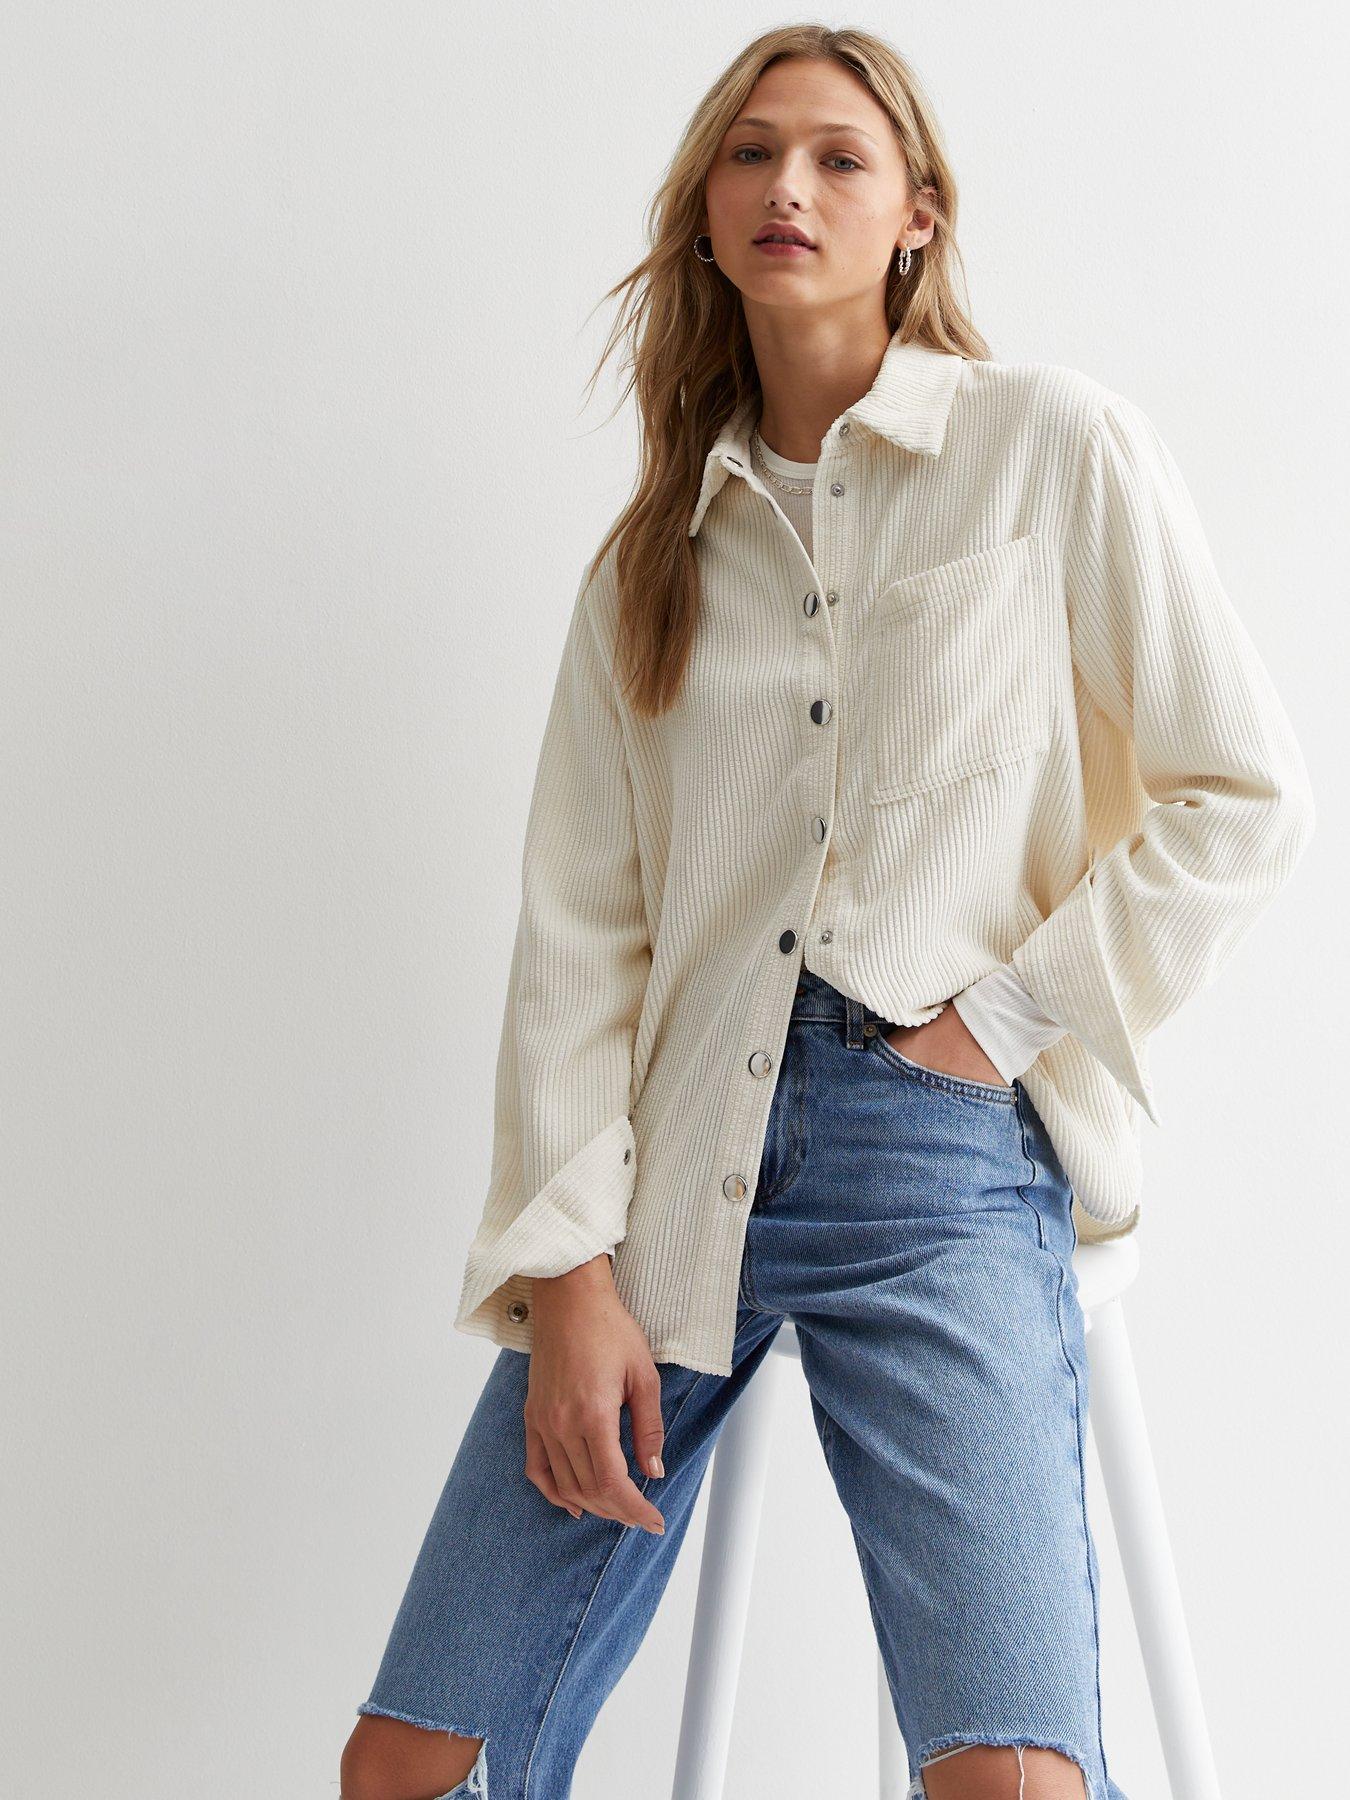 New Look Cream Lace Hook and Eye Shirt